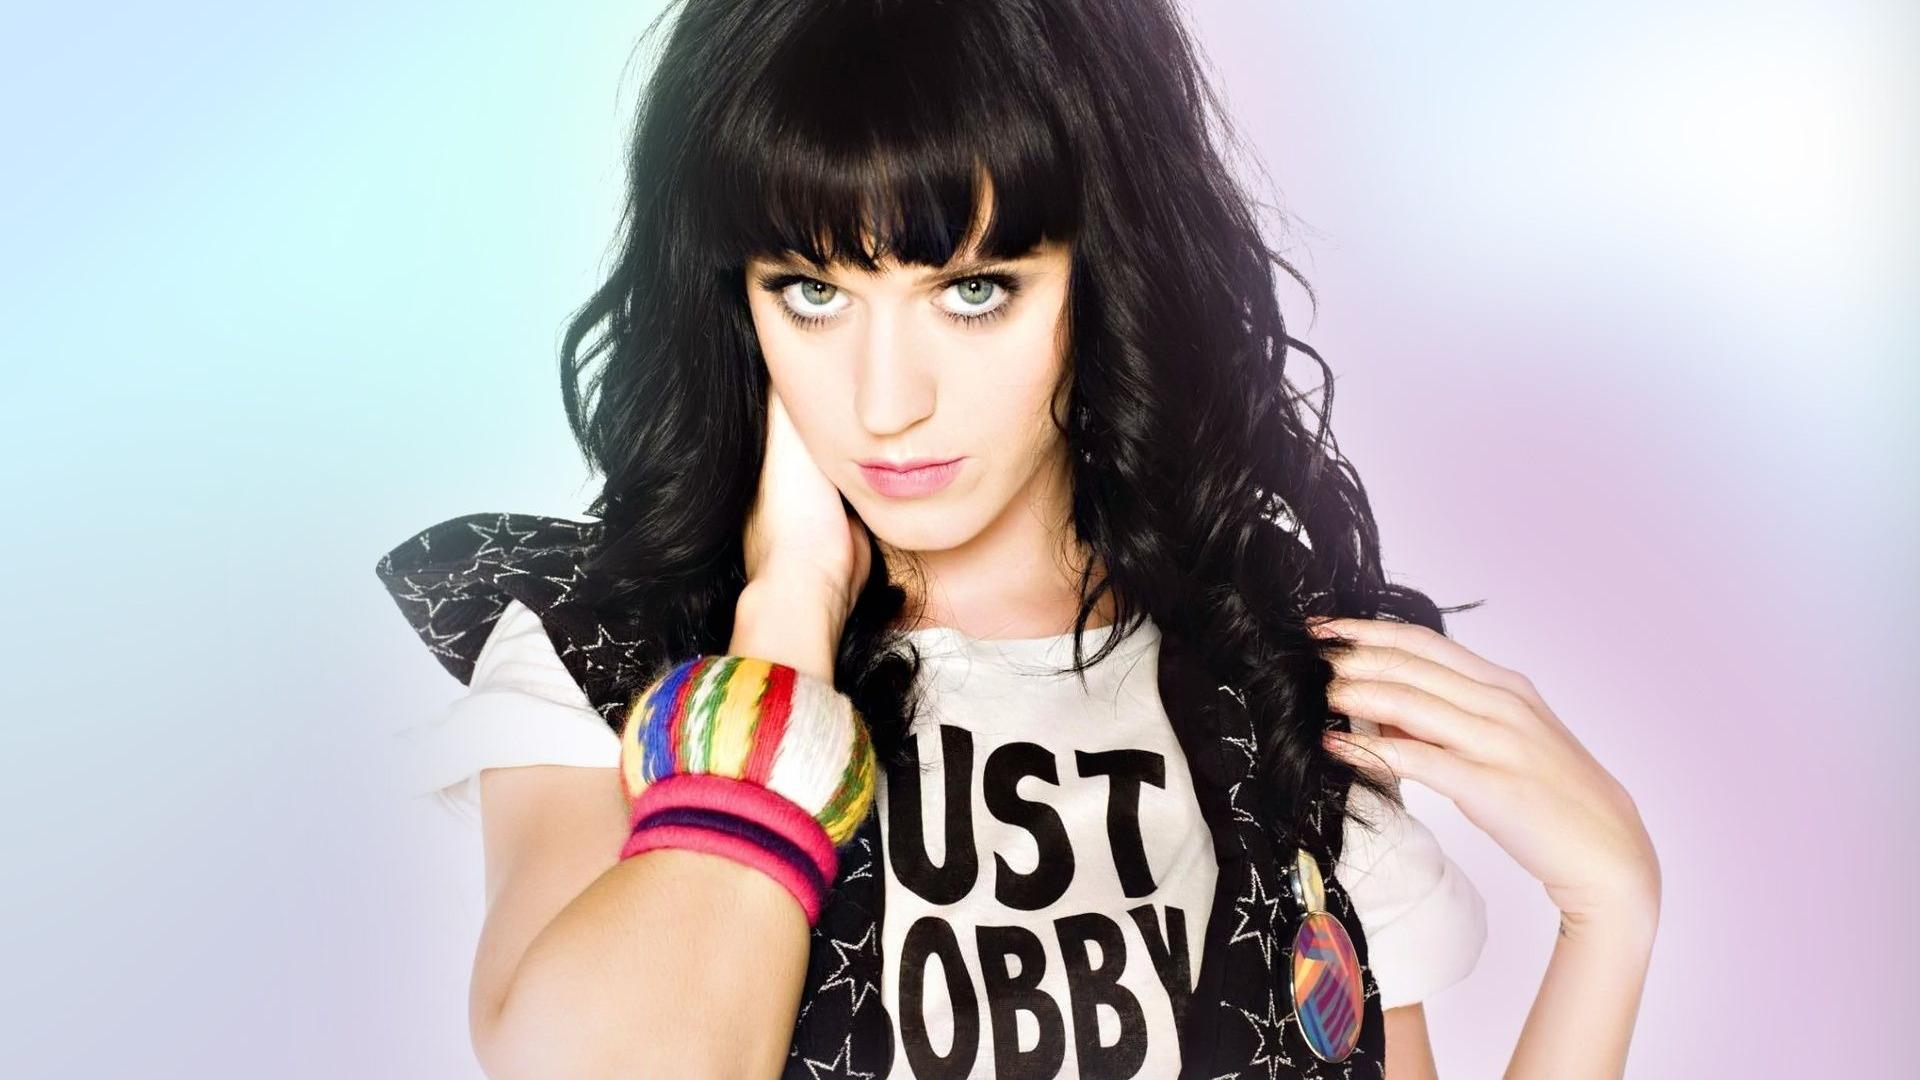 Katy Perry Background Desktop High Quality